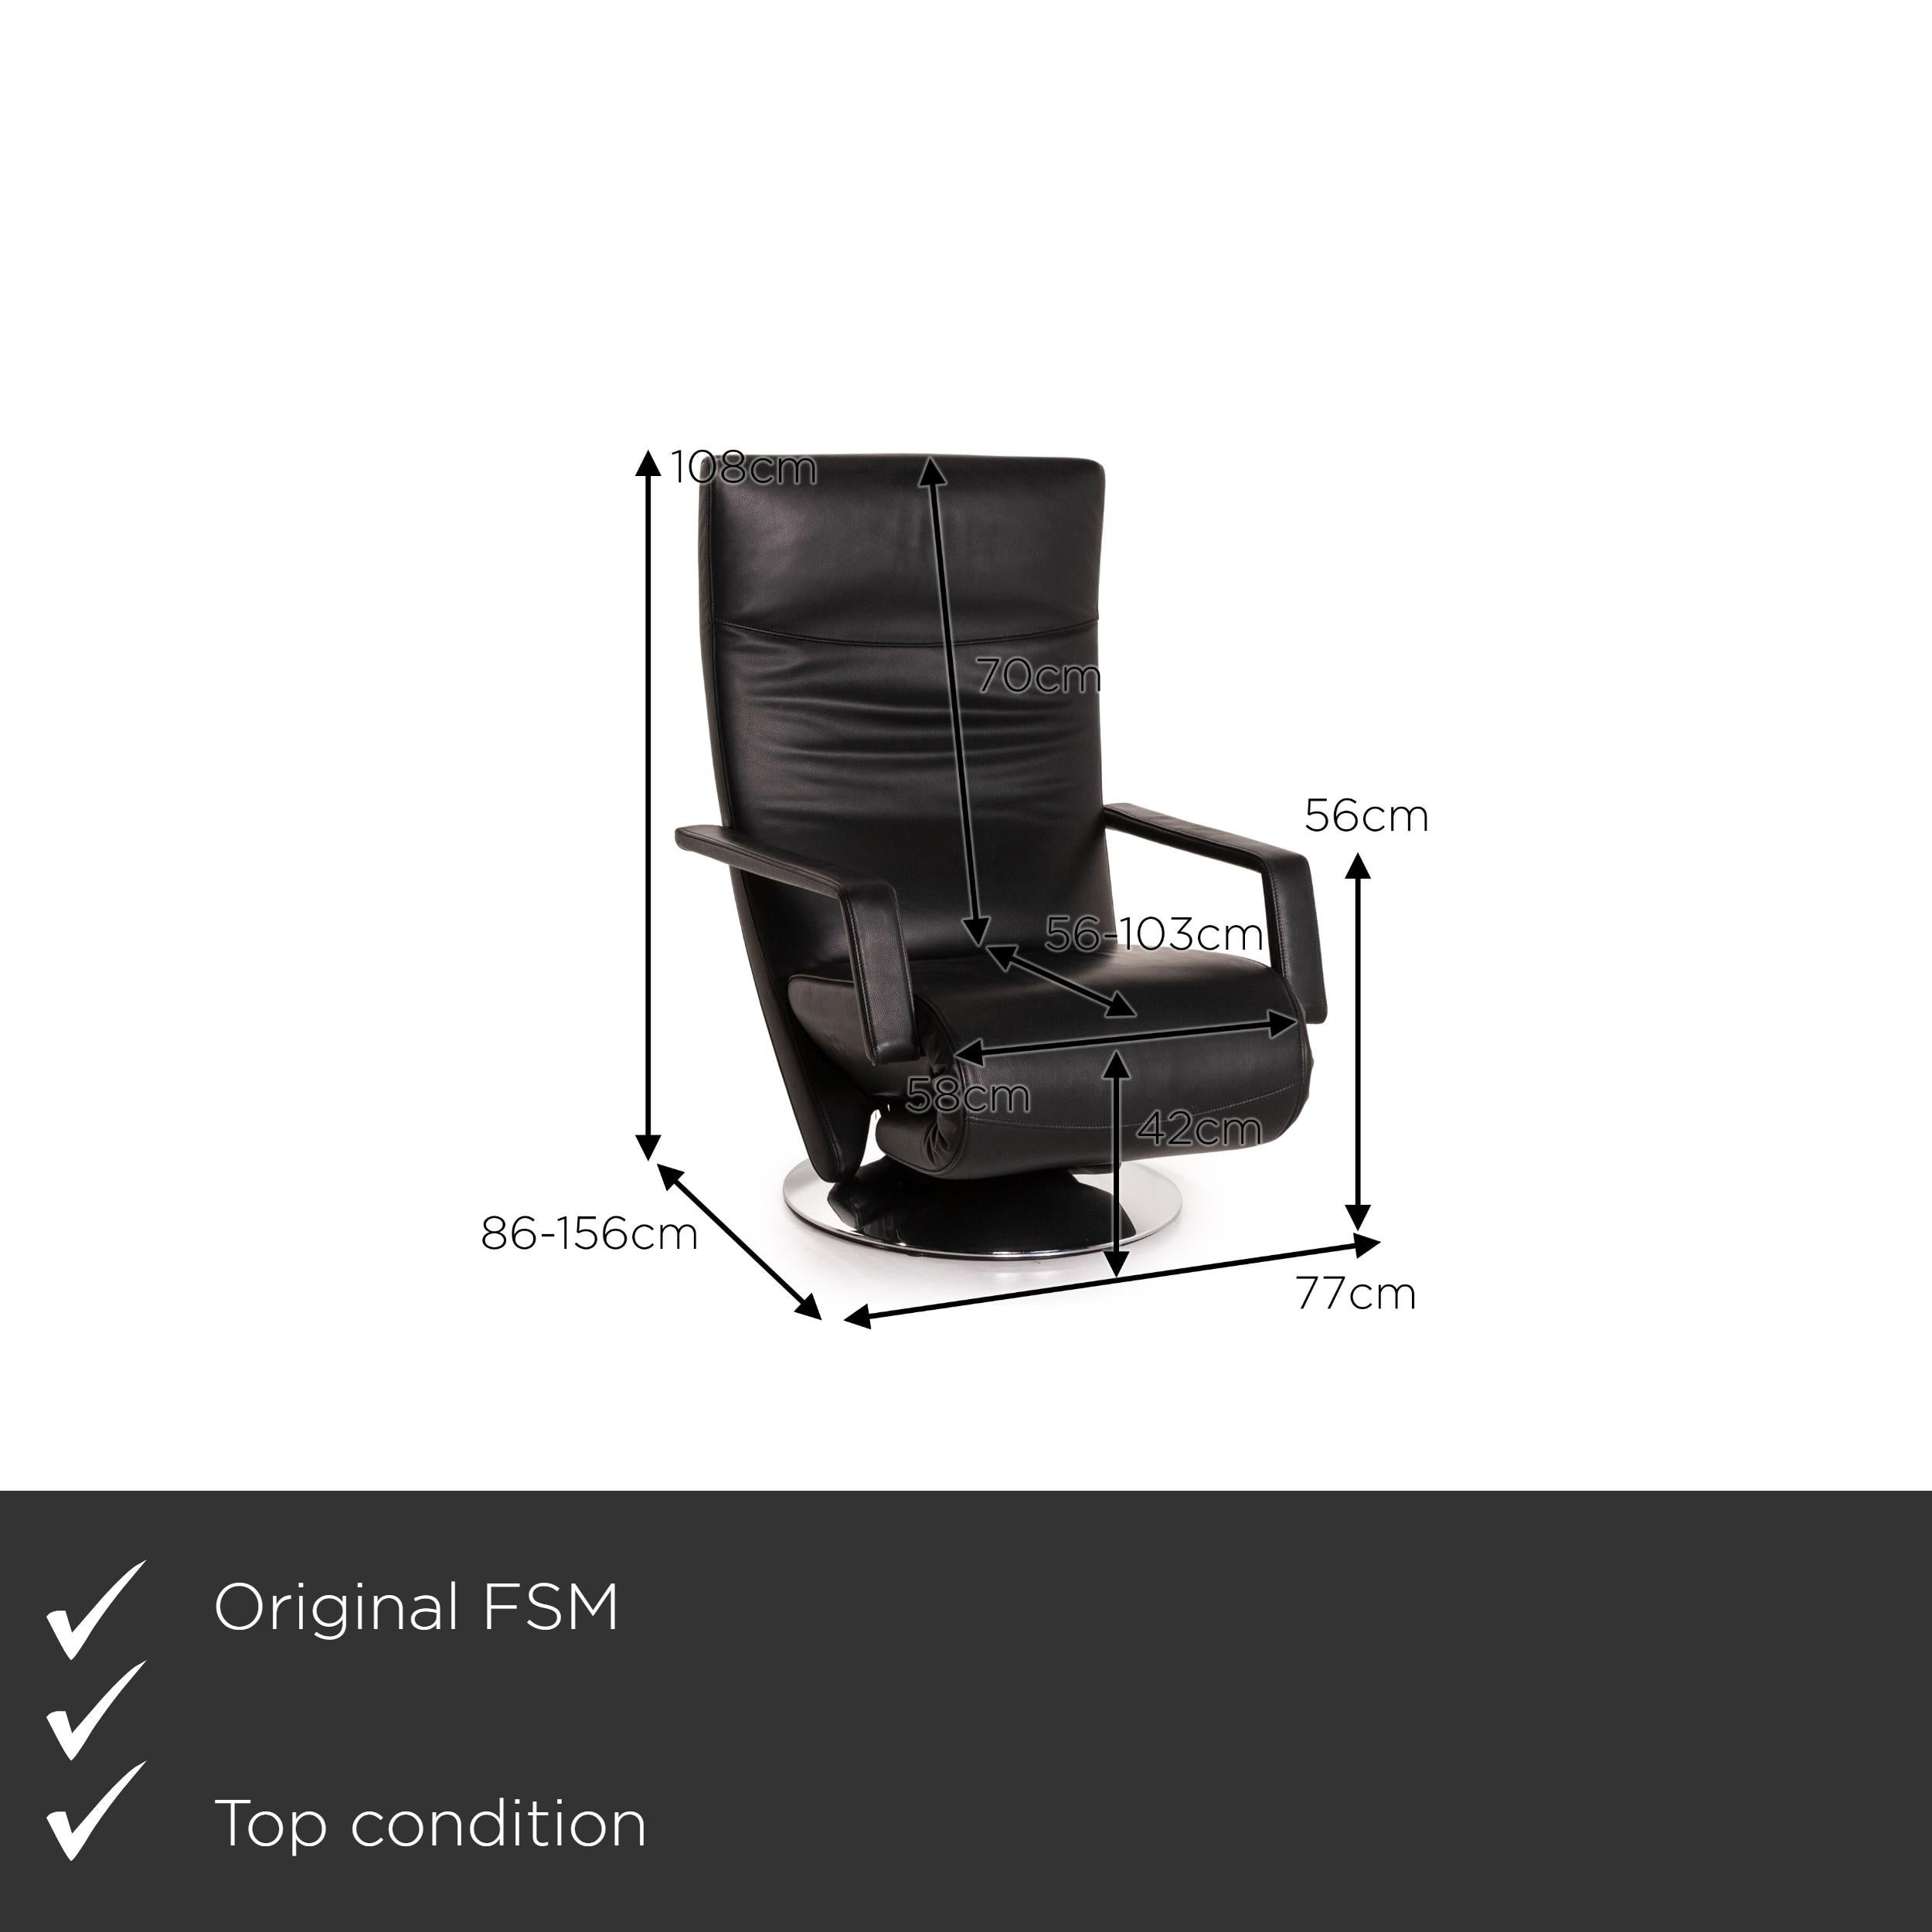 We present to you a FSM Evolo leather armchair black electrical function relax function recliner.

Product measurements in centimeters:

Depth 86
Width 77
Height 108
Seat height 42
Rest height 56
Seat depth 56
Seat width 58
Back height